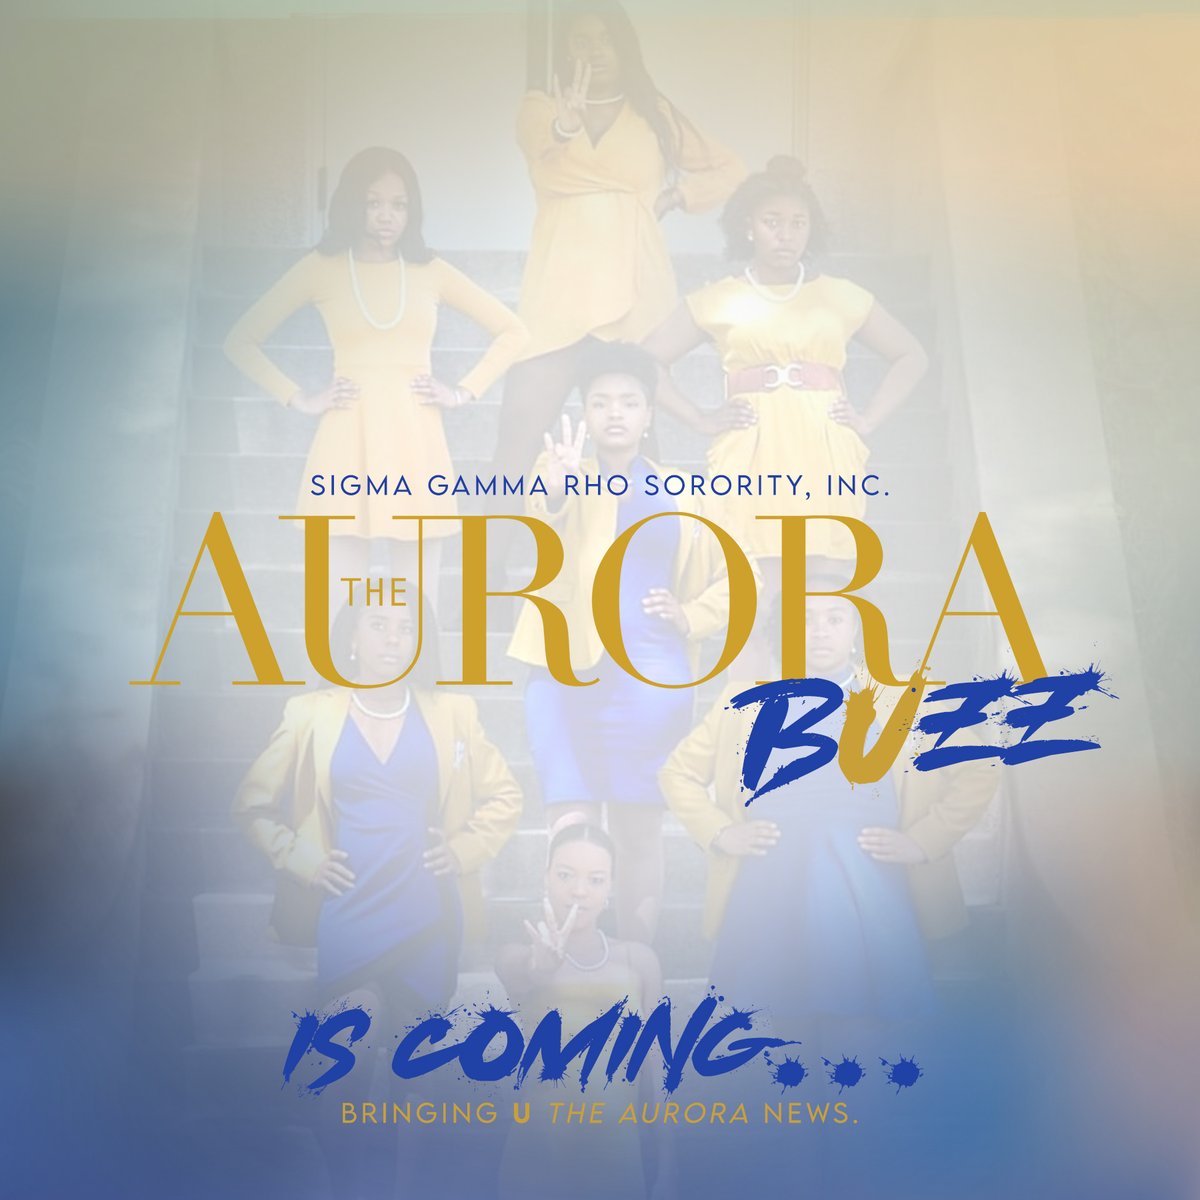 Something new is coming ! Get ready to dive into the Sigma Universe every Tuesday with The Aurora Buzz on all platforms! 📷 Discover captivating stories from across Sigma Gamma Rho Sorority, Incorporated!